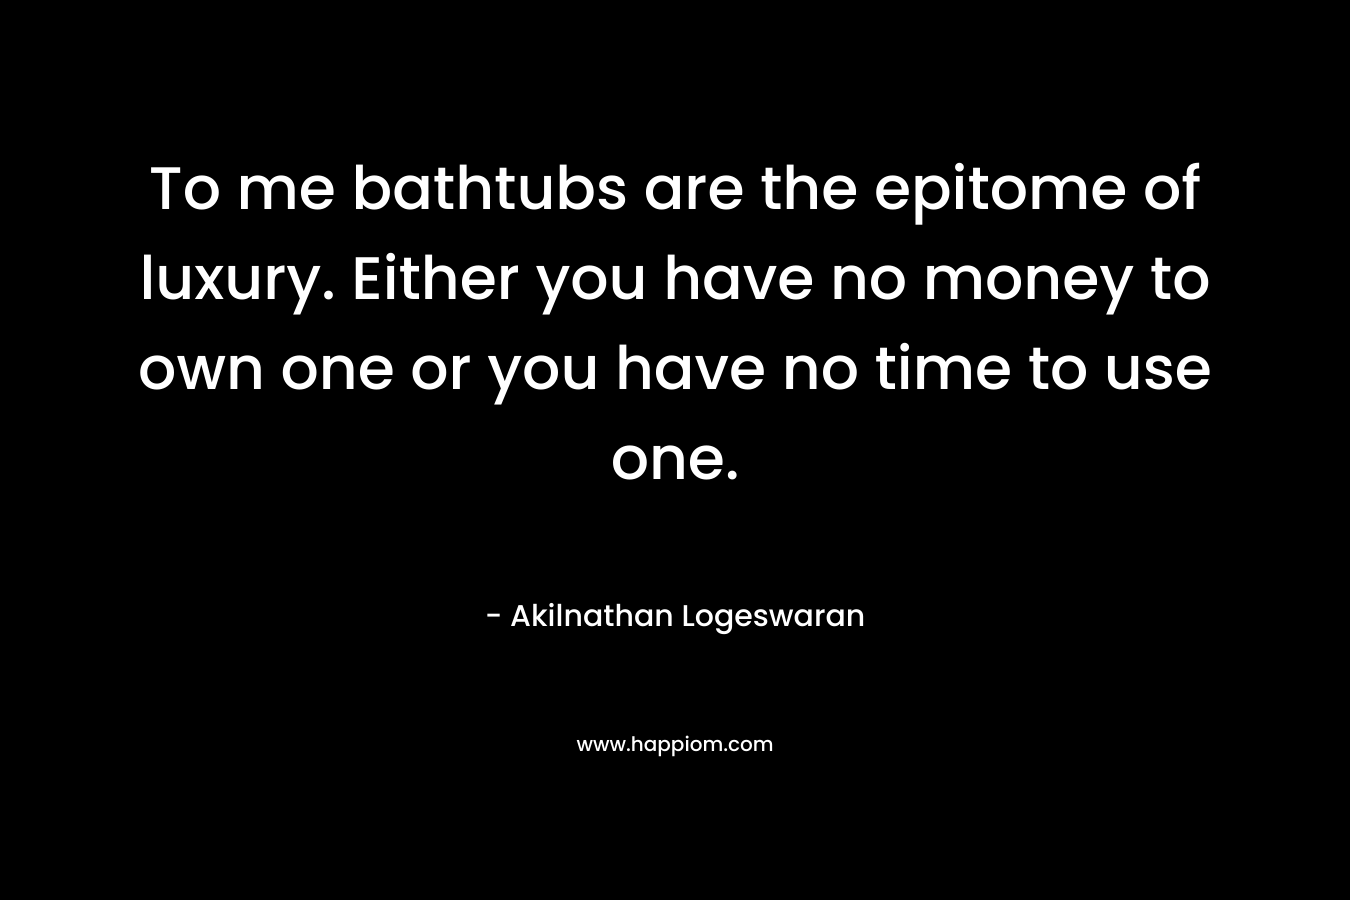 To me bathtubs are the epitome of luxury. Either you have no money to own one or you have no time to use one.